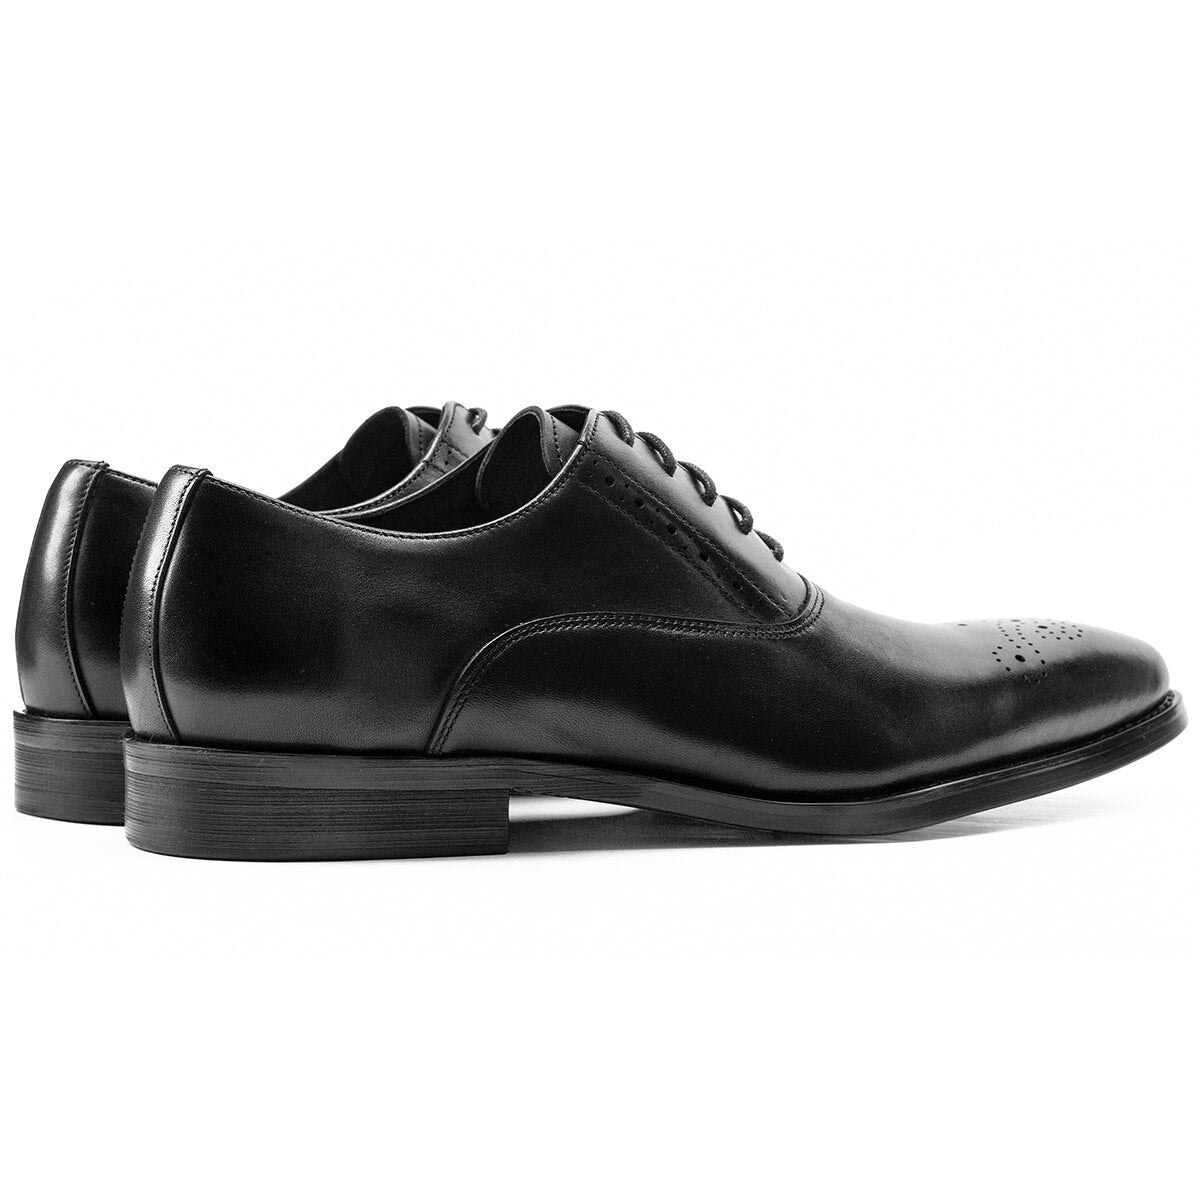 Oxfords Shoes Luxury Men Genuine Leather Office Business Wedding Black Red Wine Formal Shoe